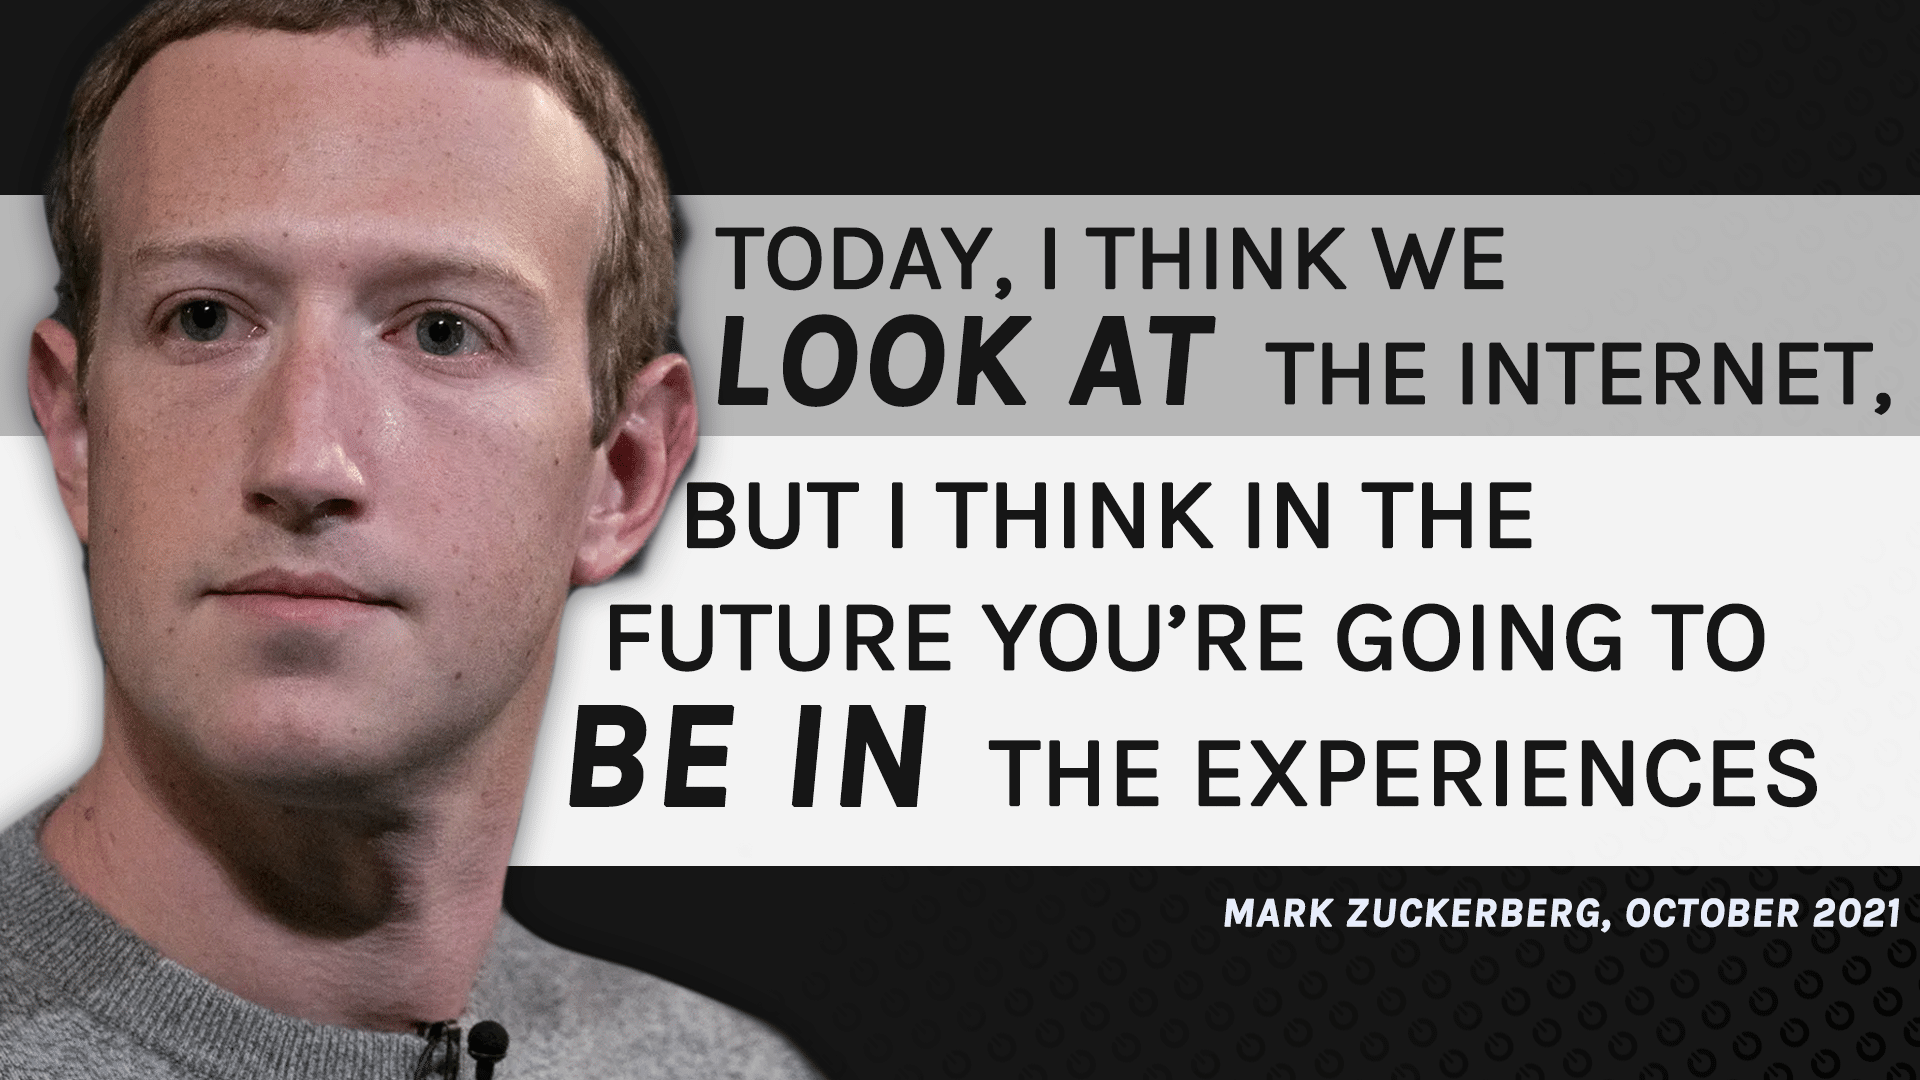 TODAY I THINK WE LOOK AT THE INTERNET BUT I THINK IN THE FUTURE YOU'RE GOING TO BE IN THE EXPERIENCES Mark Zuckerberg October 2021